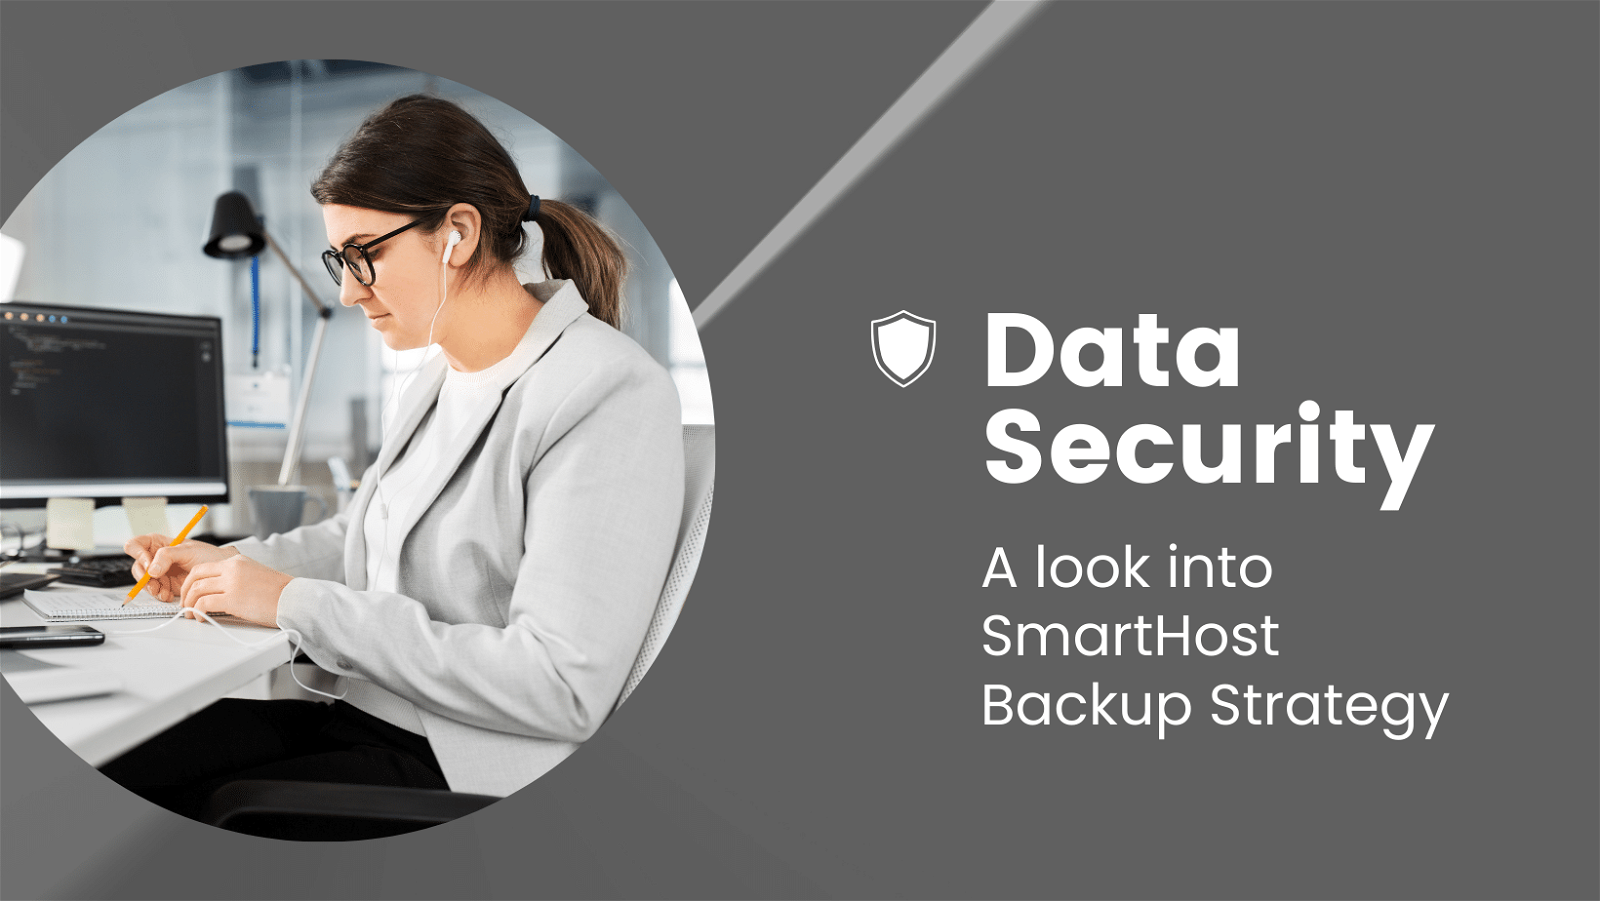 A professional woman reviews documents in a modern office environment, exemplifying data security practices with a focus on SmartHost Backup Strategy.